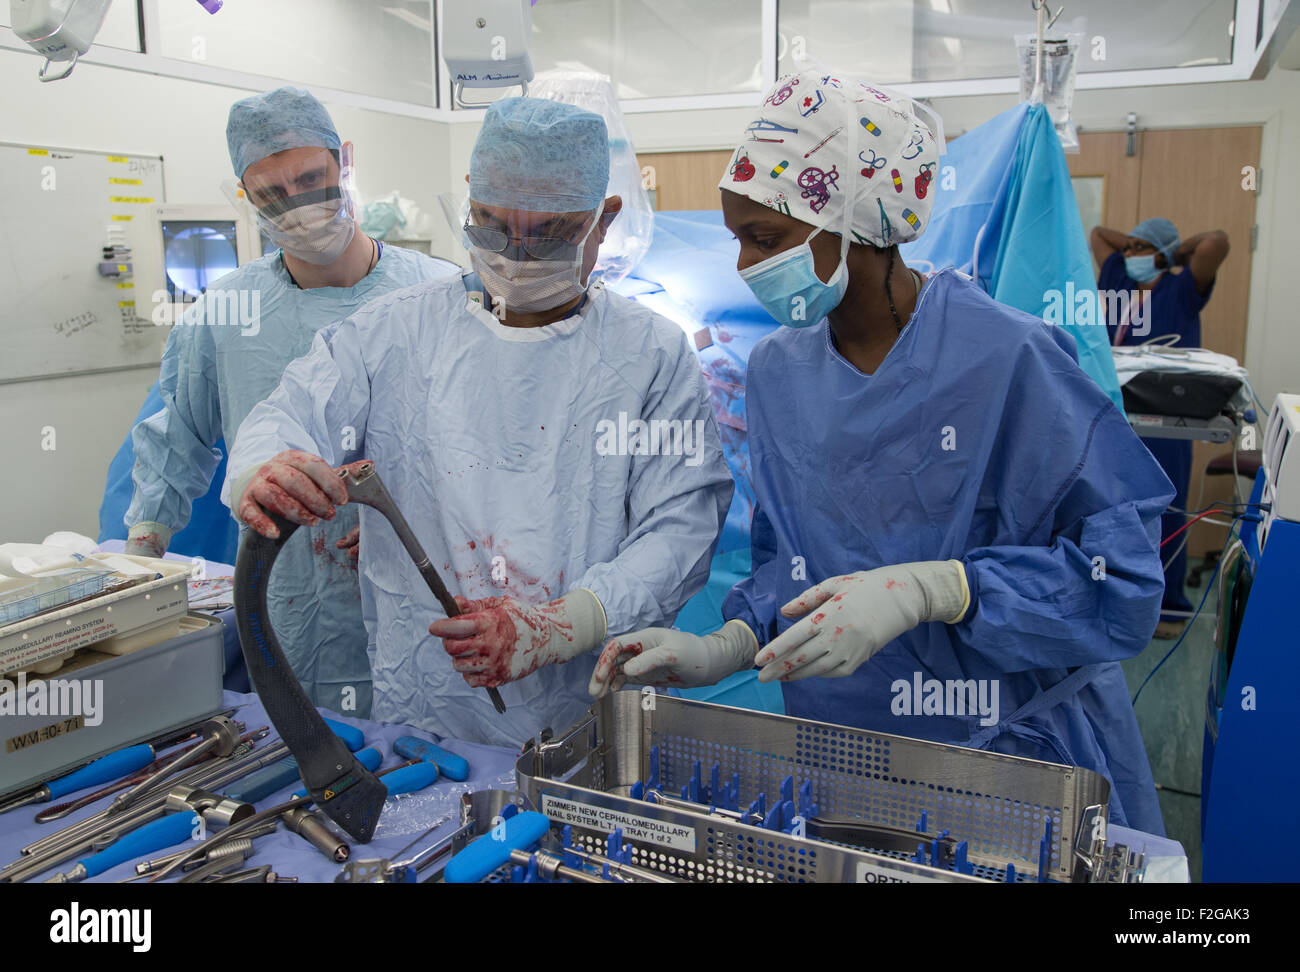 Surgeon and medical staff working in an operating theatre in an NHS hospital Stock Photo